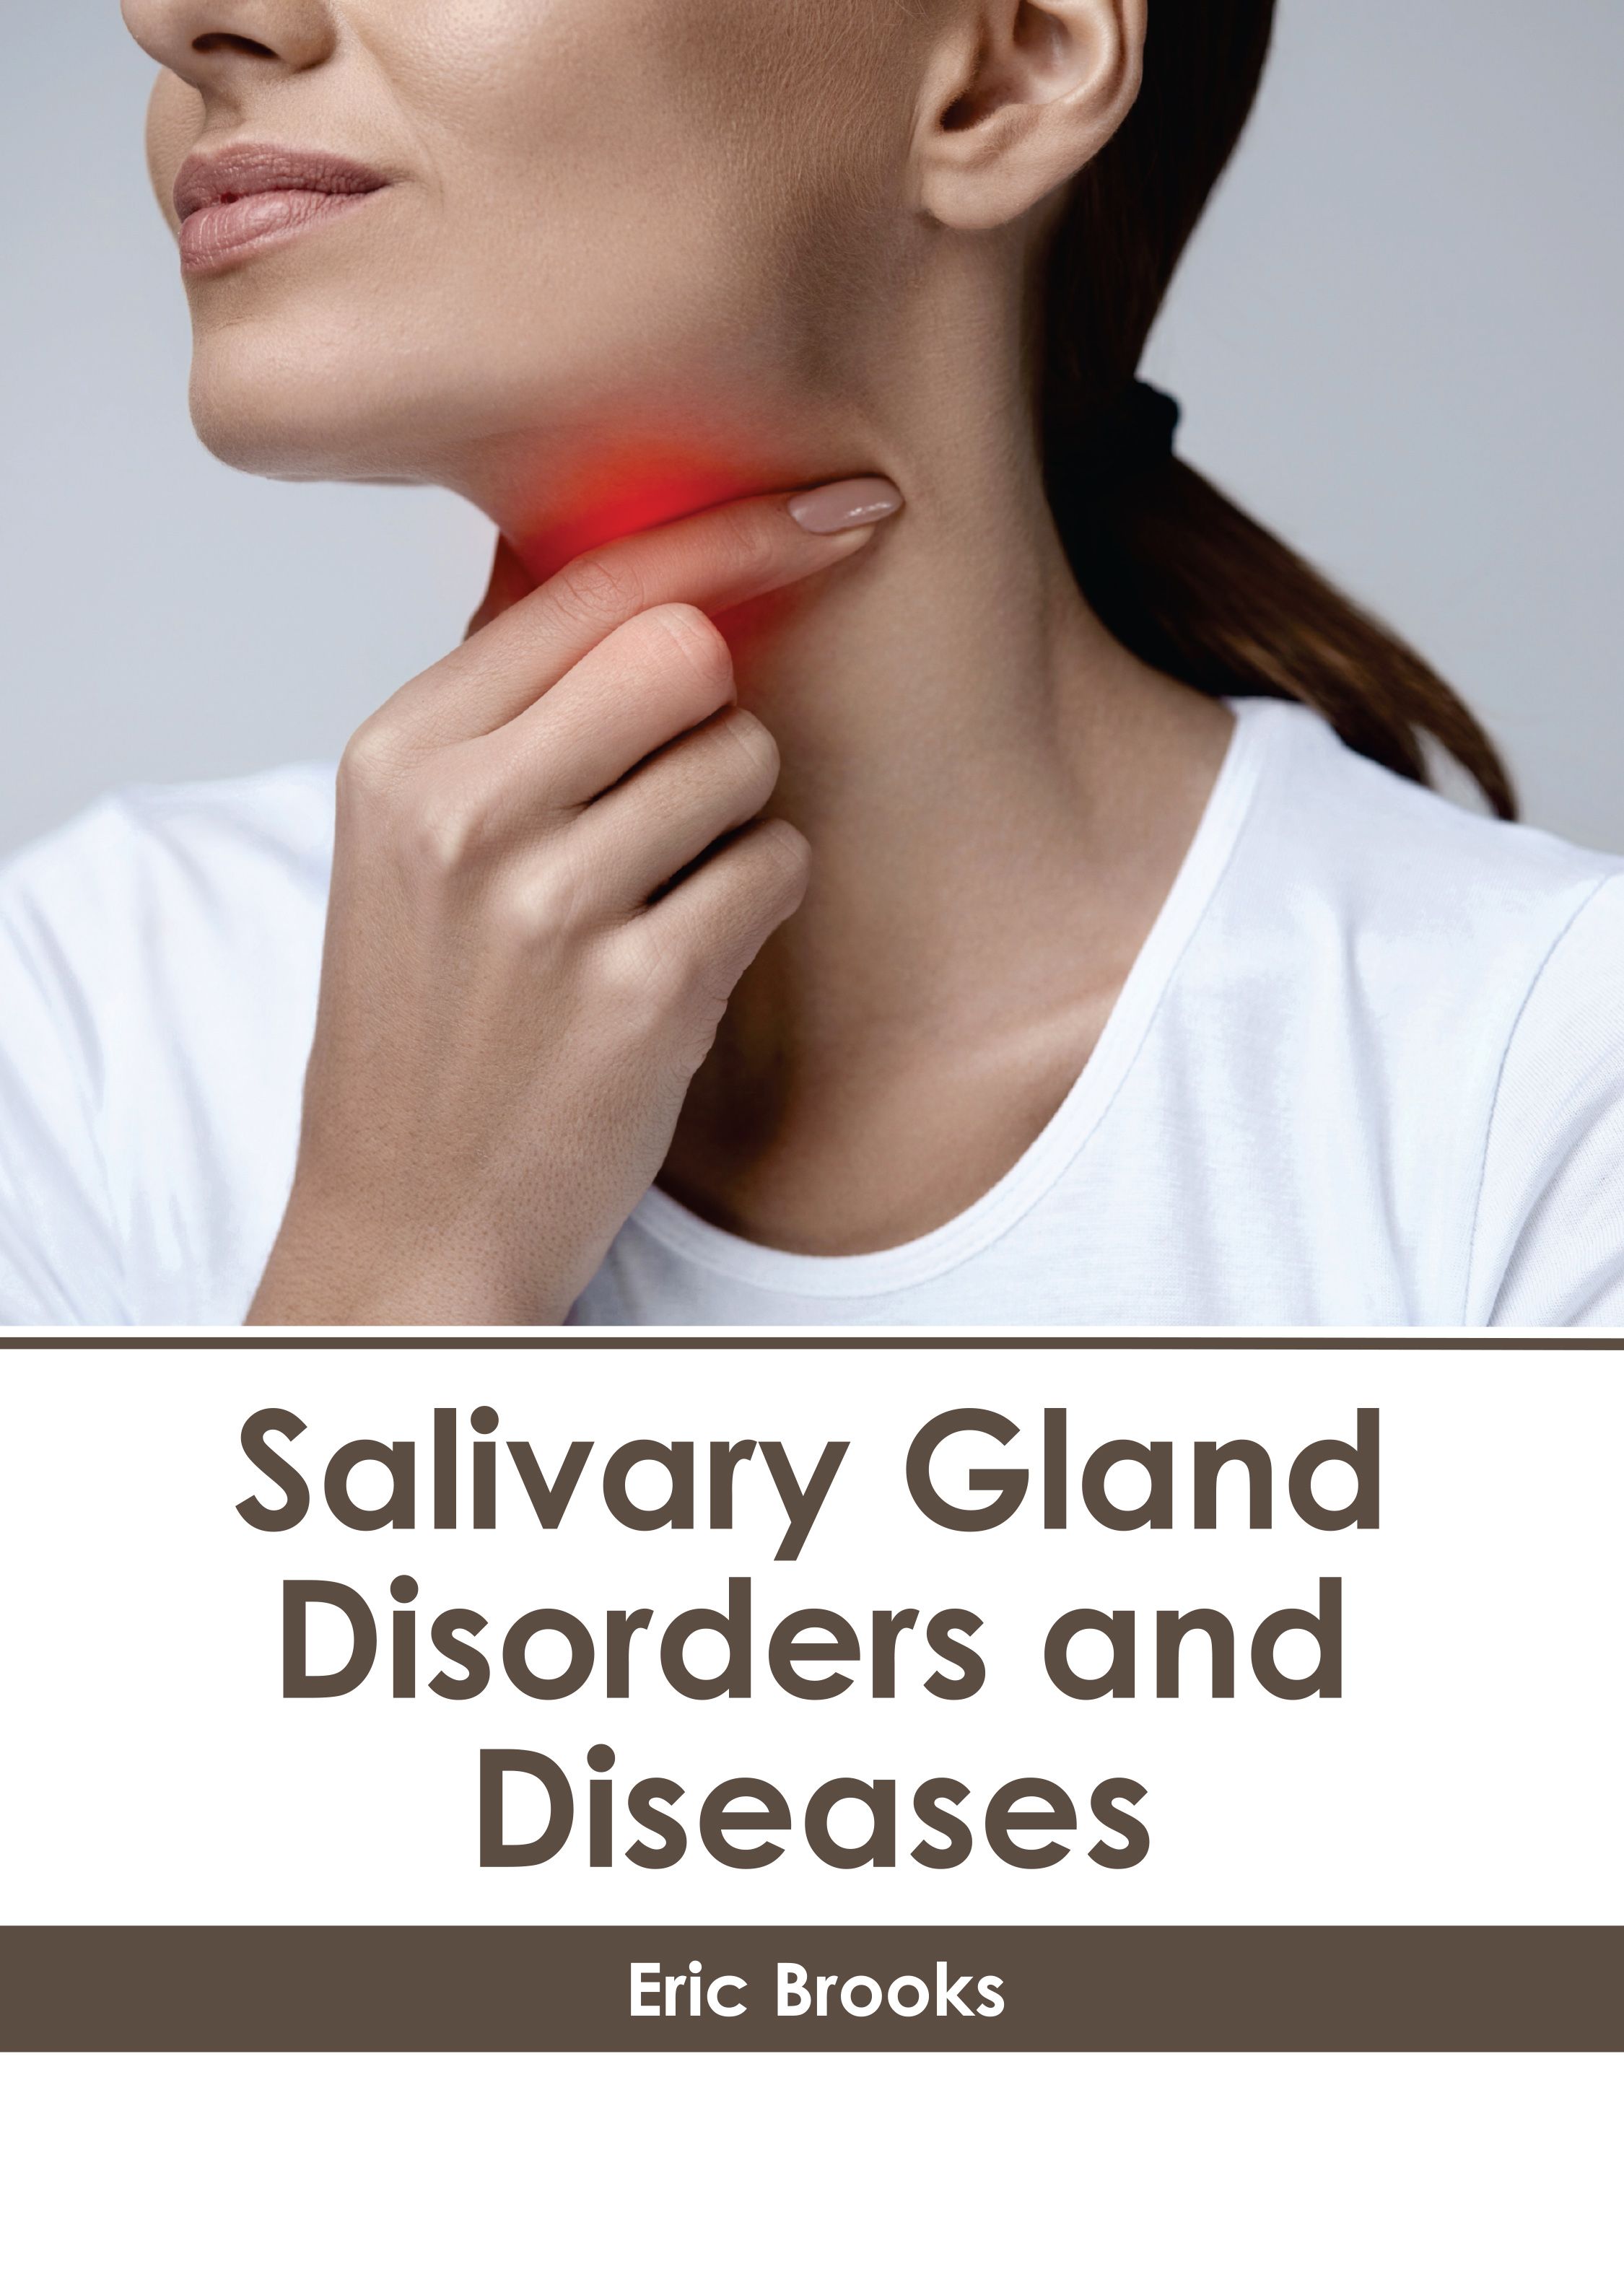 

exclusive-publishers/american-medical-publishers/salivary-gland-disorders-and-diseases-9781639278015